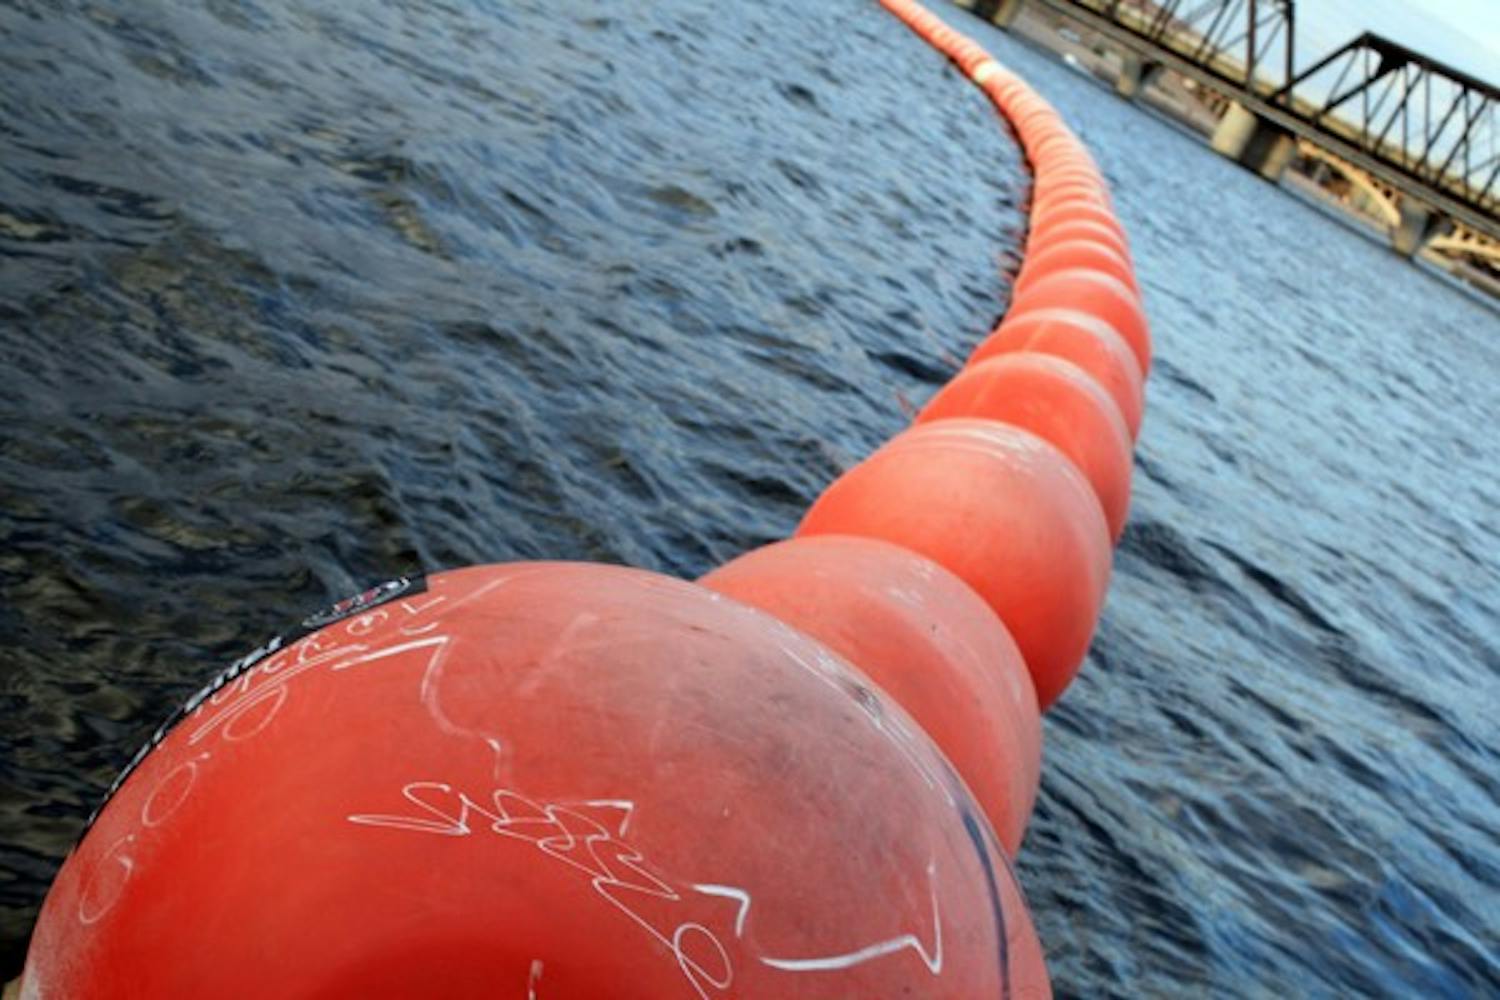 The bright orange buoys that keep Tempe Town Lake-goers safe bounce with the waves as the wind whips over the water at dusk. (Photo by Jessie Wardarski)